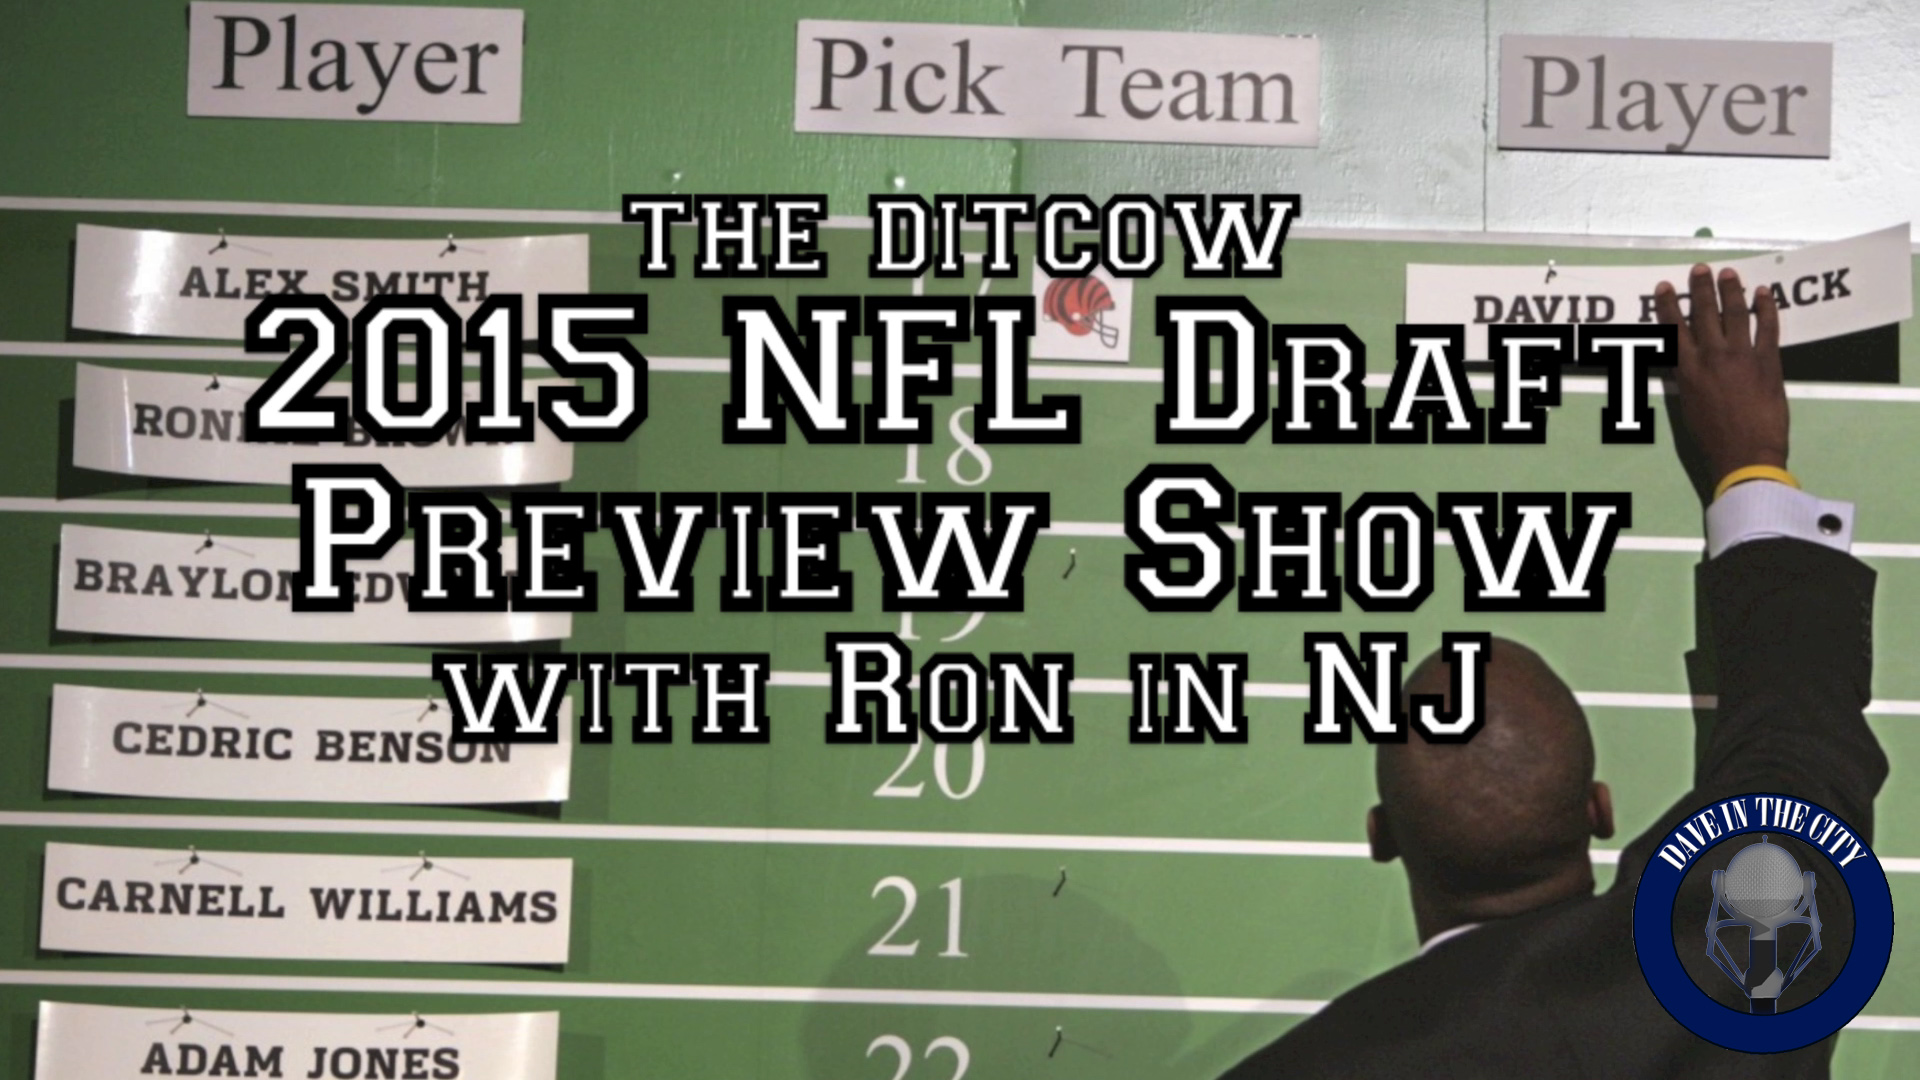 Podcast: 2015 NFL Draft Preview Show w/ Ron in NJ + Mock Draft (04-28-15)